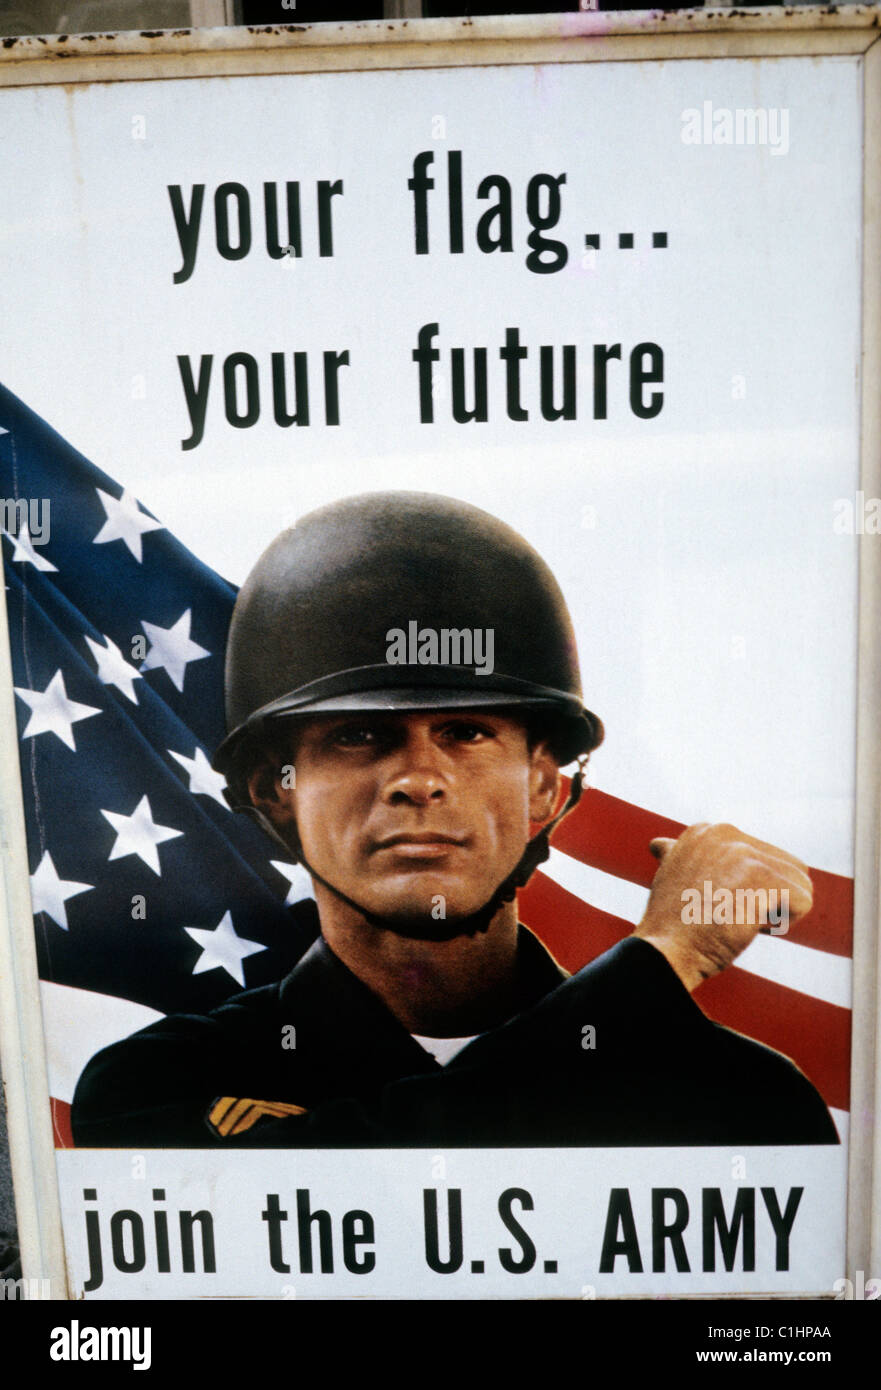 American soldier on US Army recruiting military recruitment poster advertizement advert entitled 'your flag... your future, join the U.S.  Army' USA United States of America 1970s 1971  KATHY DEWITT Stock Photo